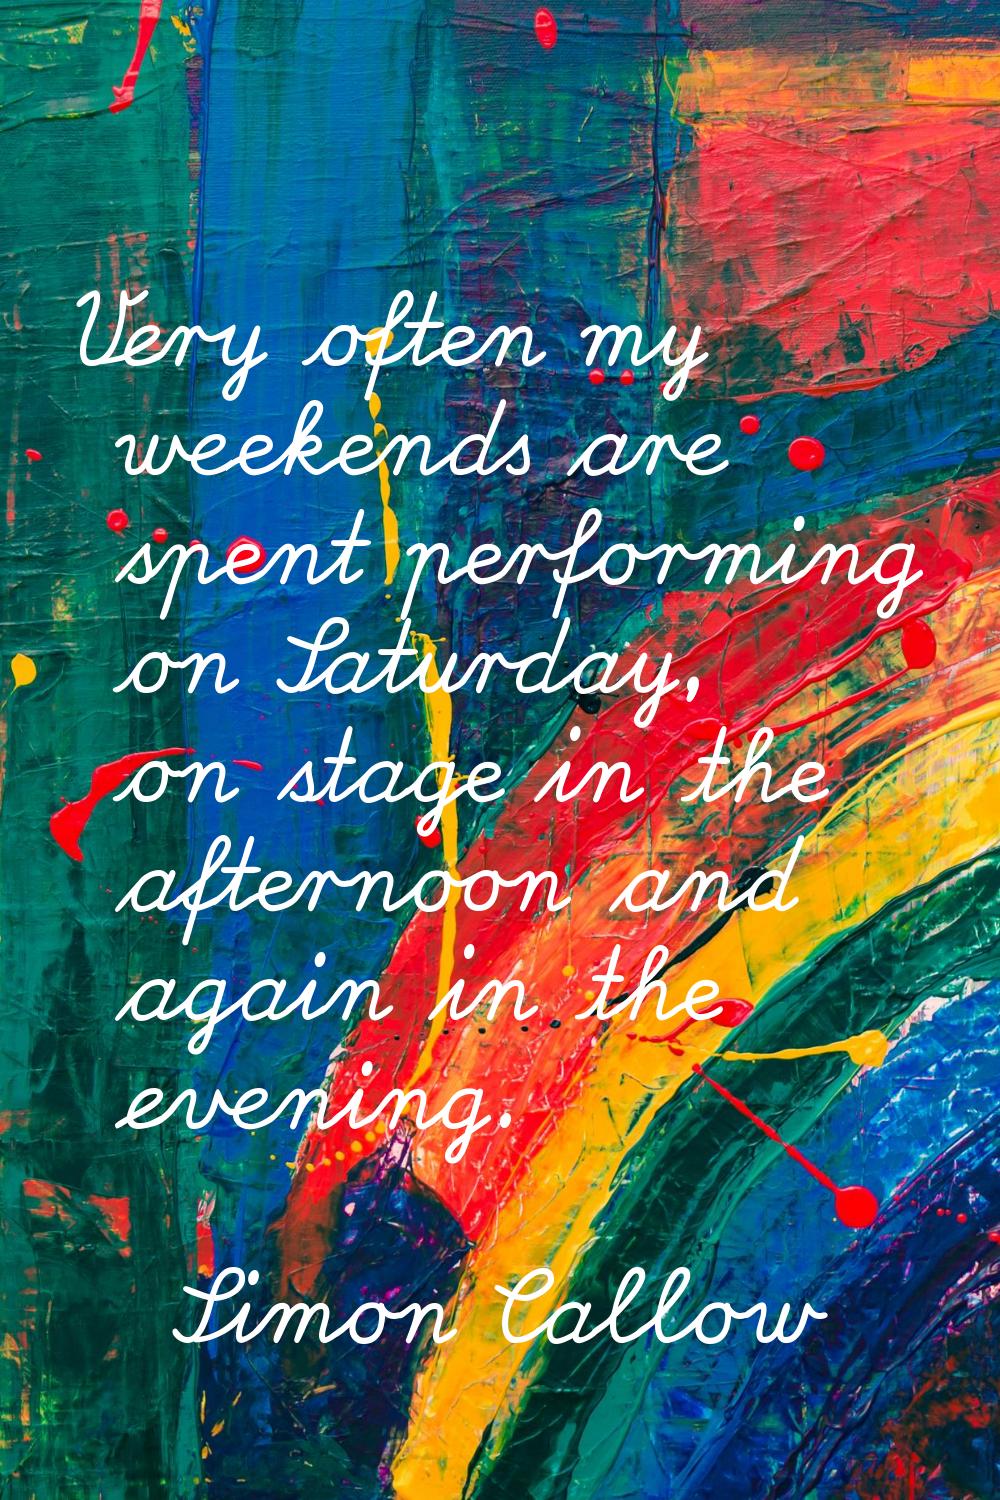 Very often my weekends are spent performing on Saturday, on stage in the afternoon and again in the